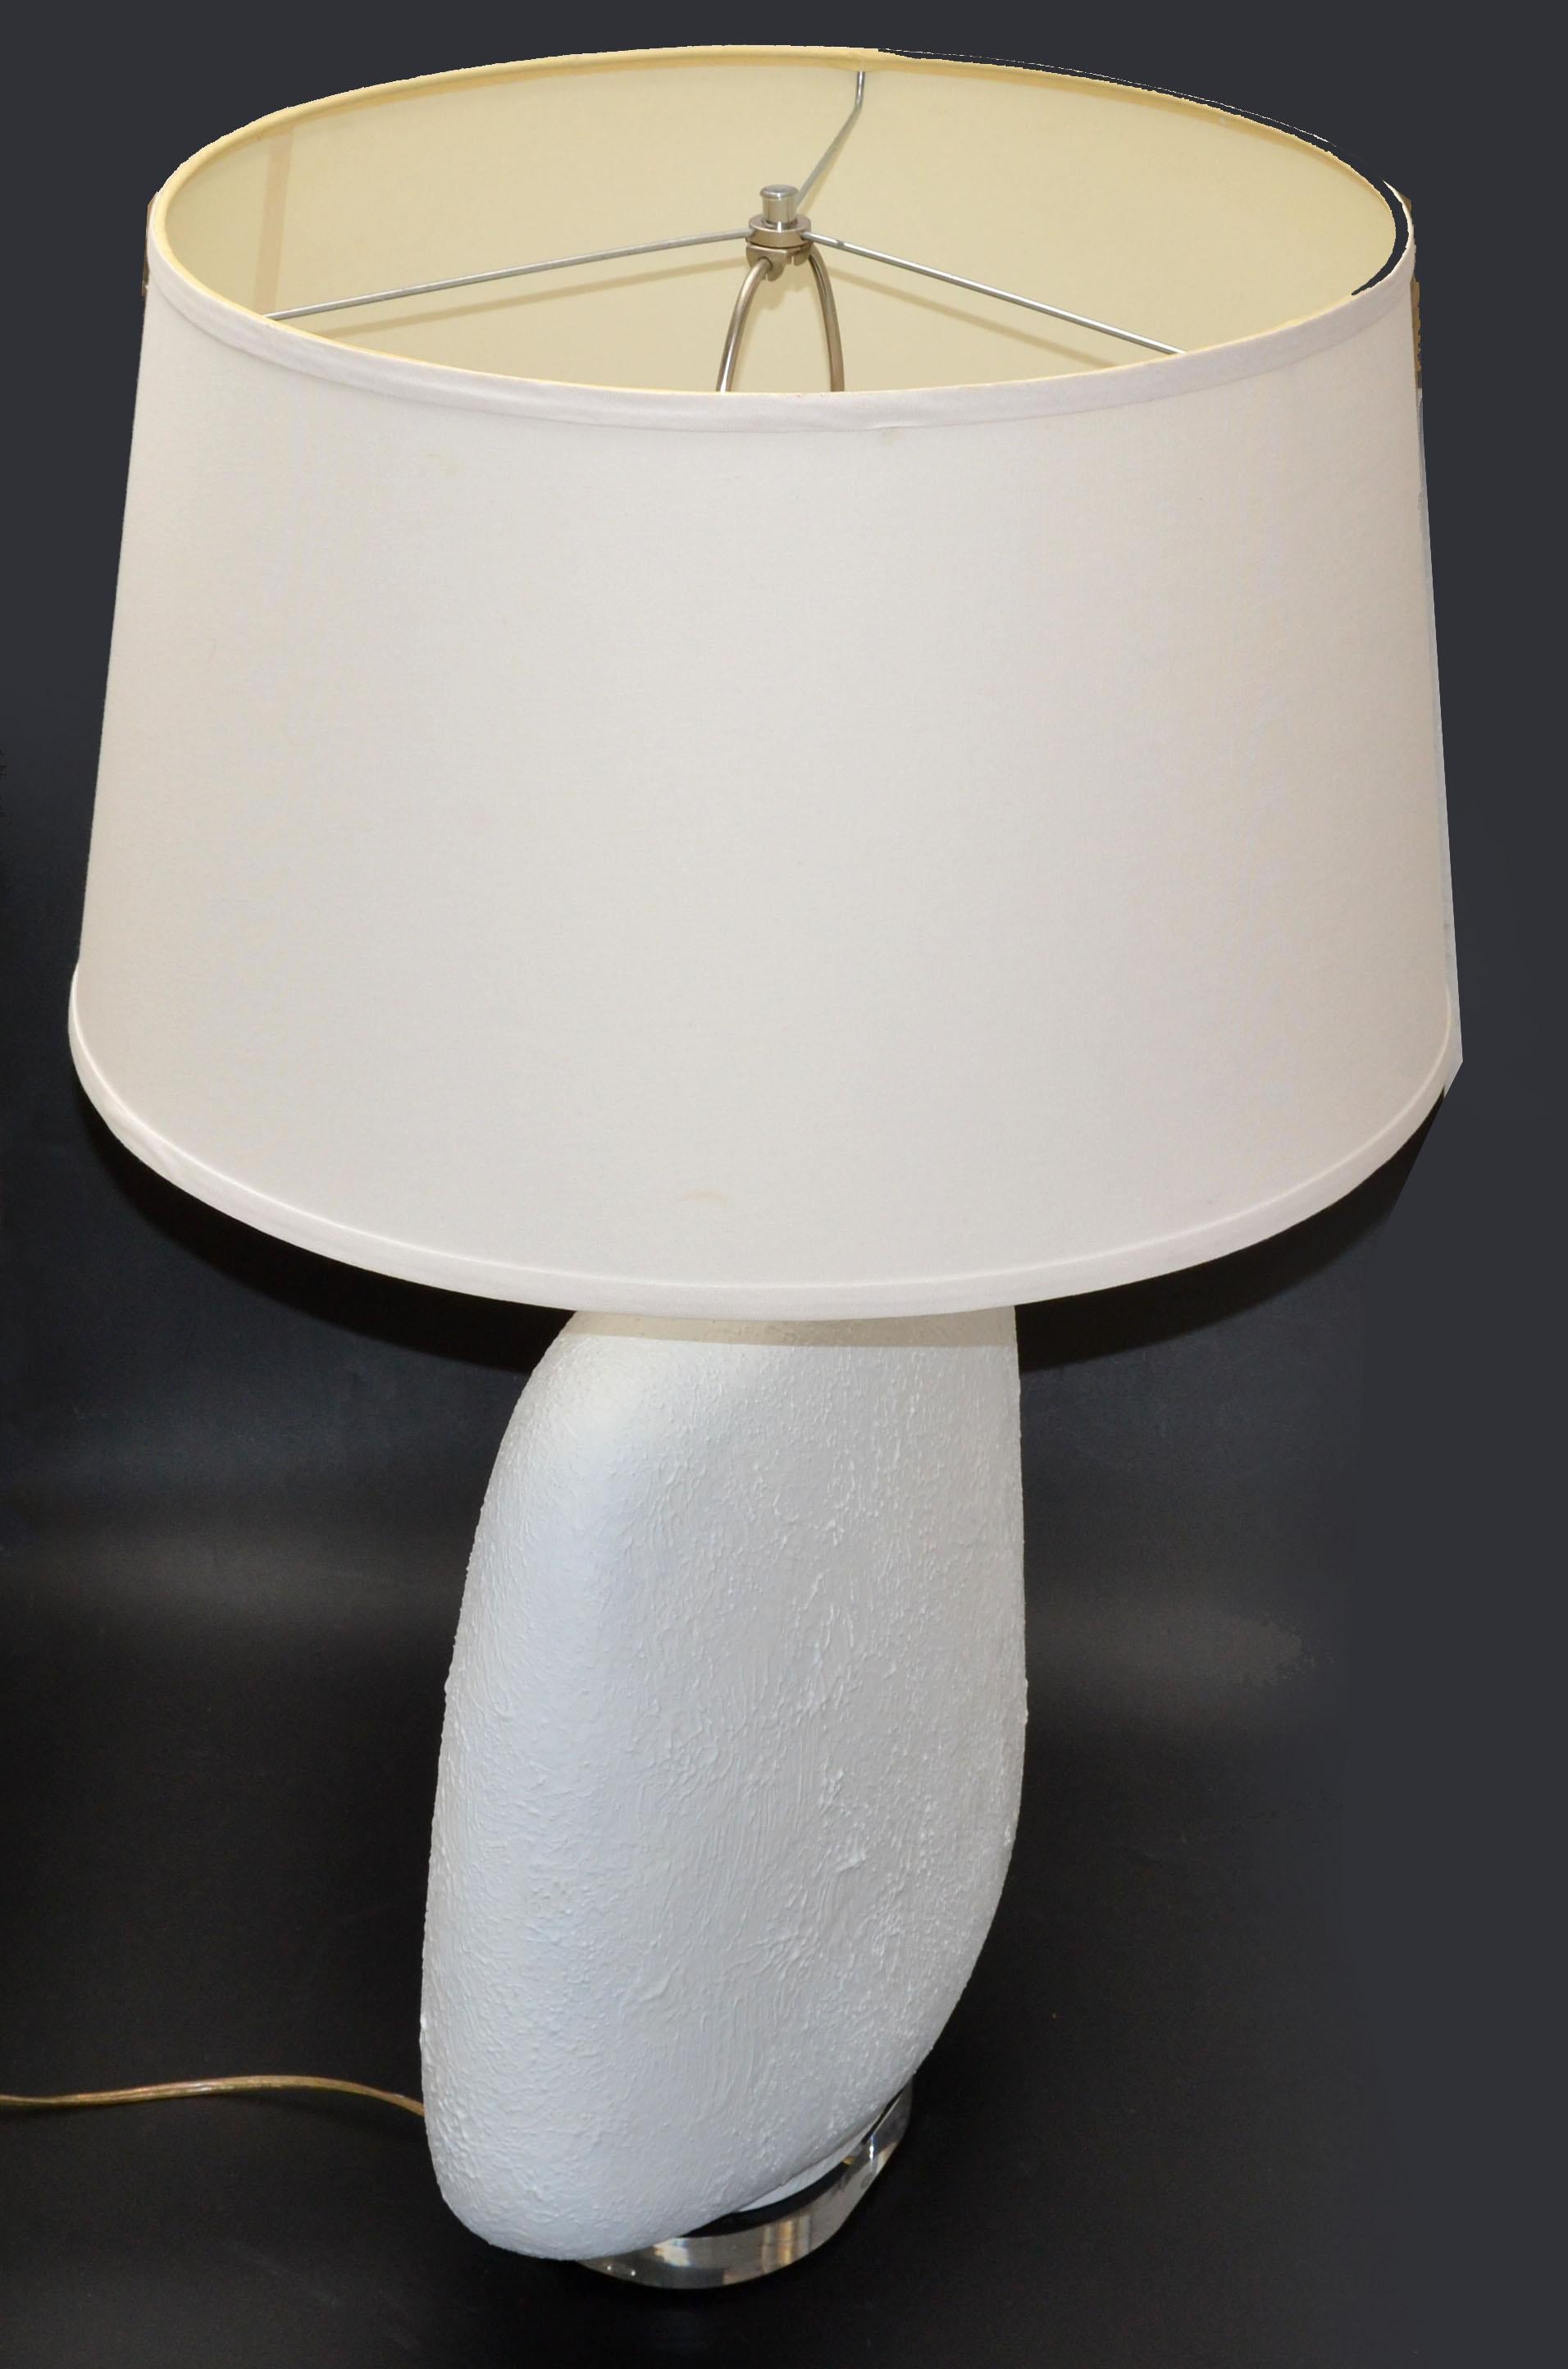 Mid-Century Modern Iconic Sculptural Textured White Plaster Table Lamp on Lucite In Good Condition For Sale In Miami, FL